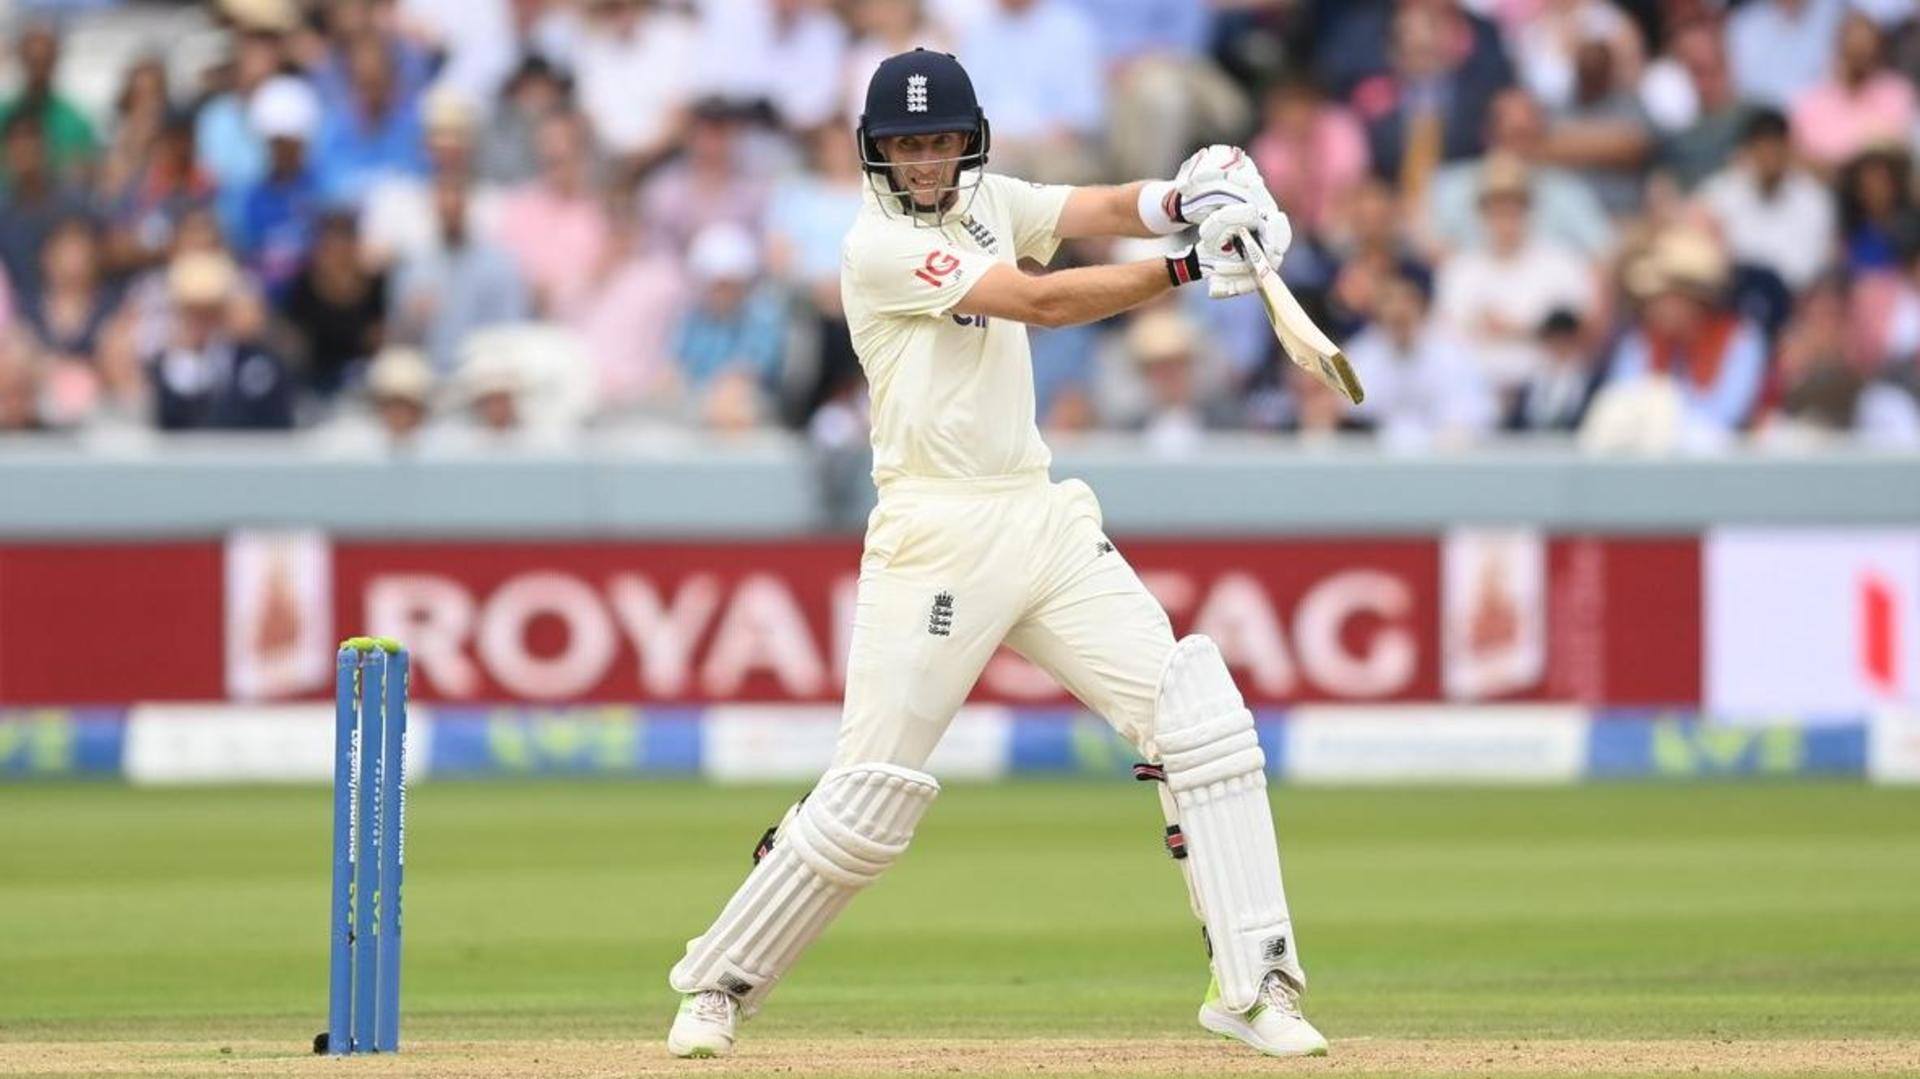 The Ashes: Joe Root vs Australia's pacers in Test cricket